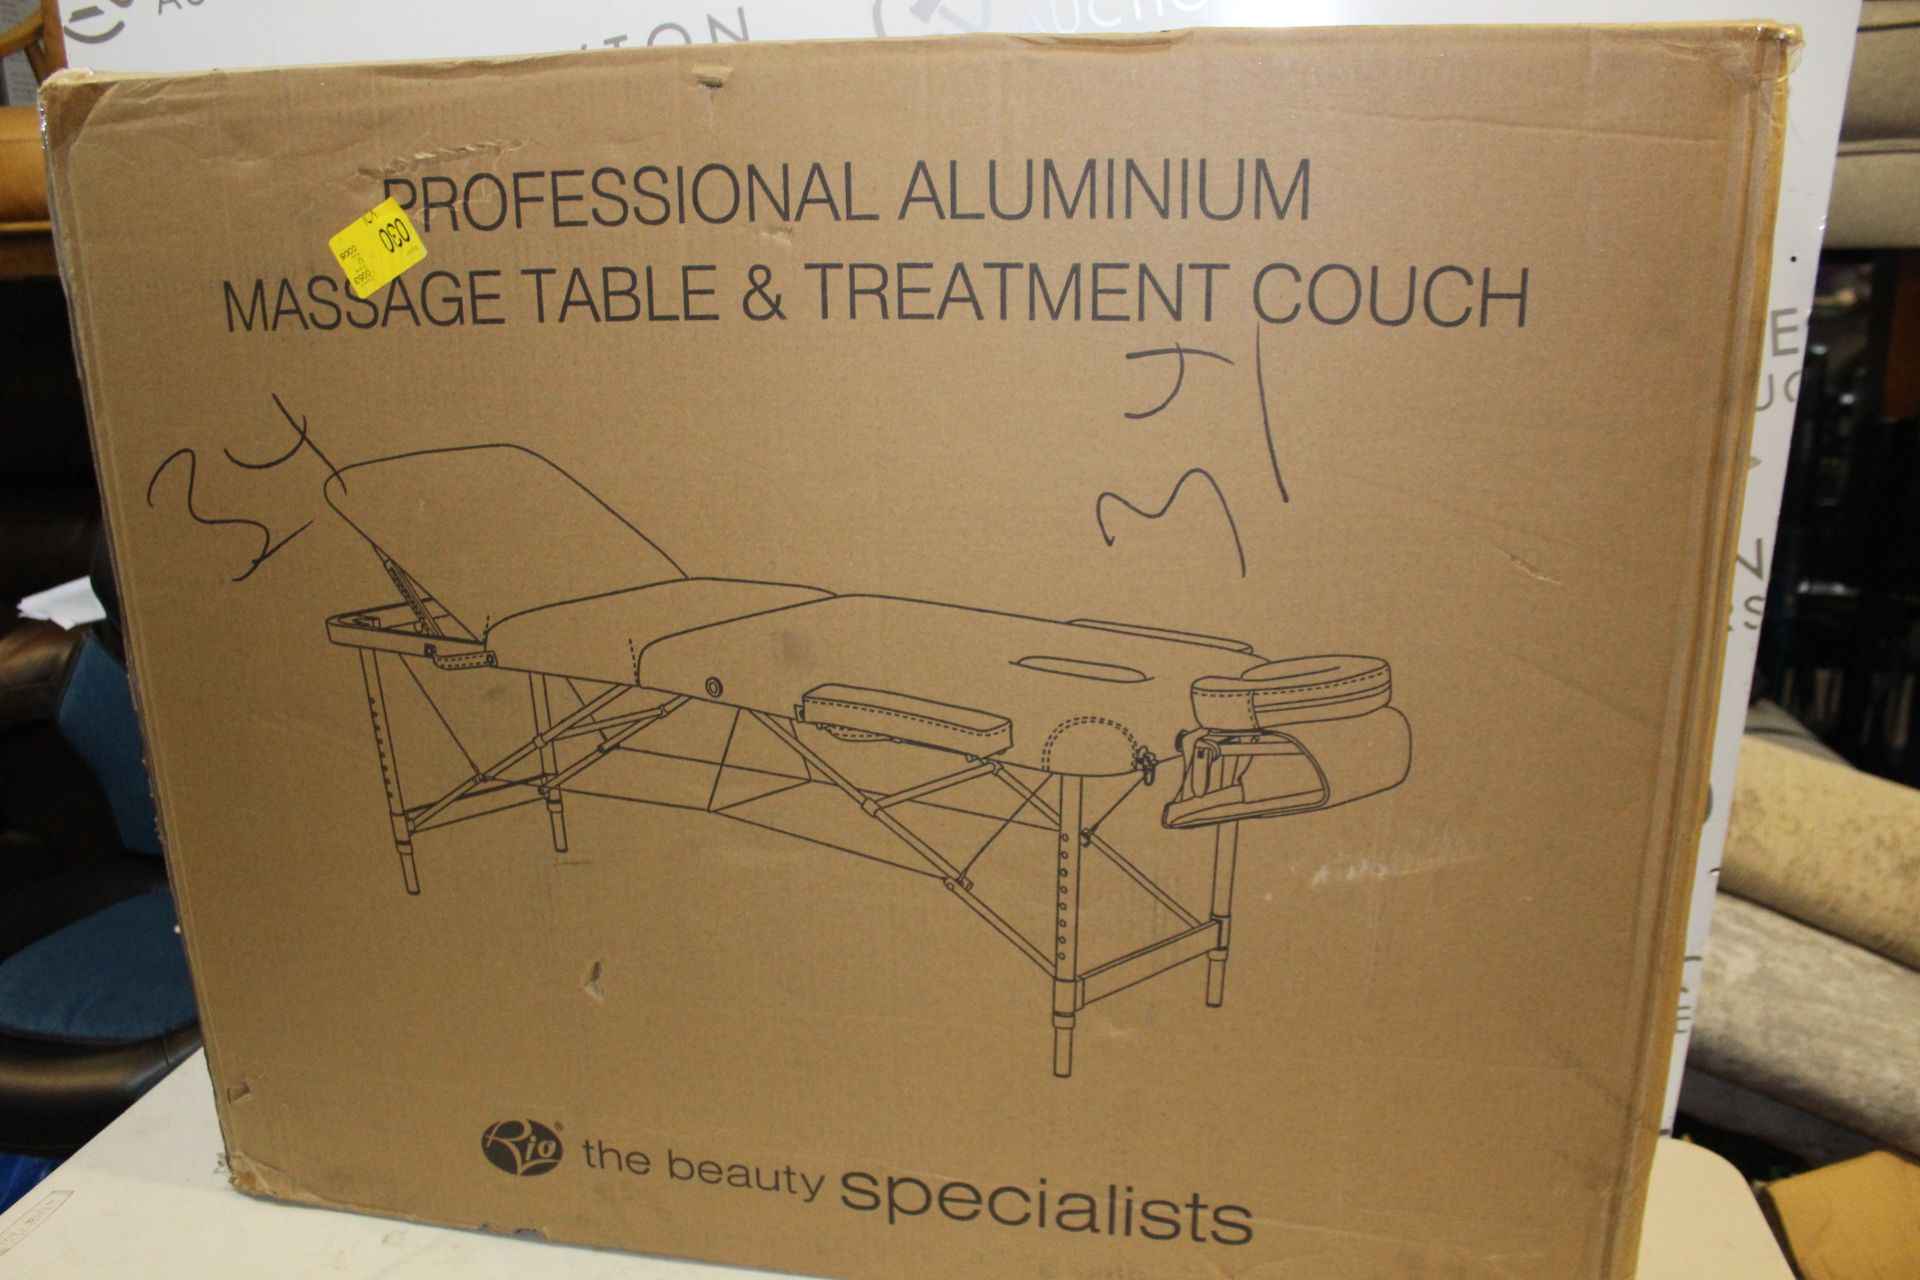 1 BRAND NEW BOXED RIO PROFESSIONAL ALUMINIUM MASSAGE TABLE AND TREATMENT COUCH IN BLACK RRP Â£149